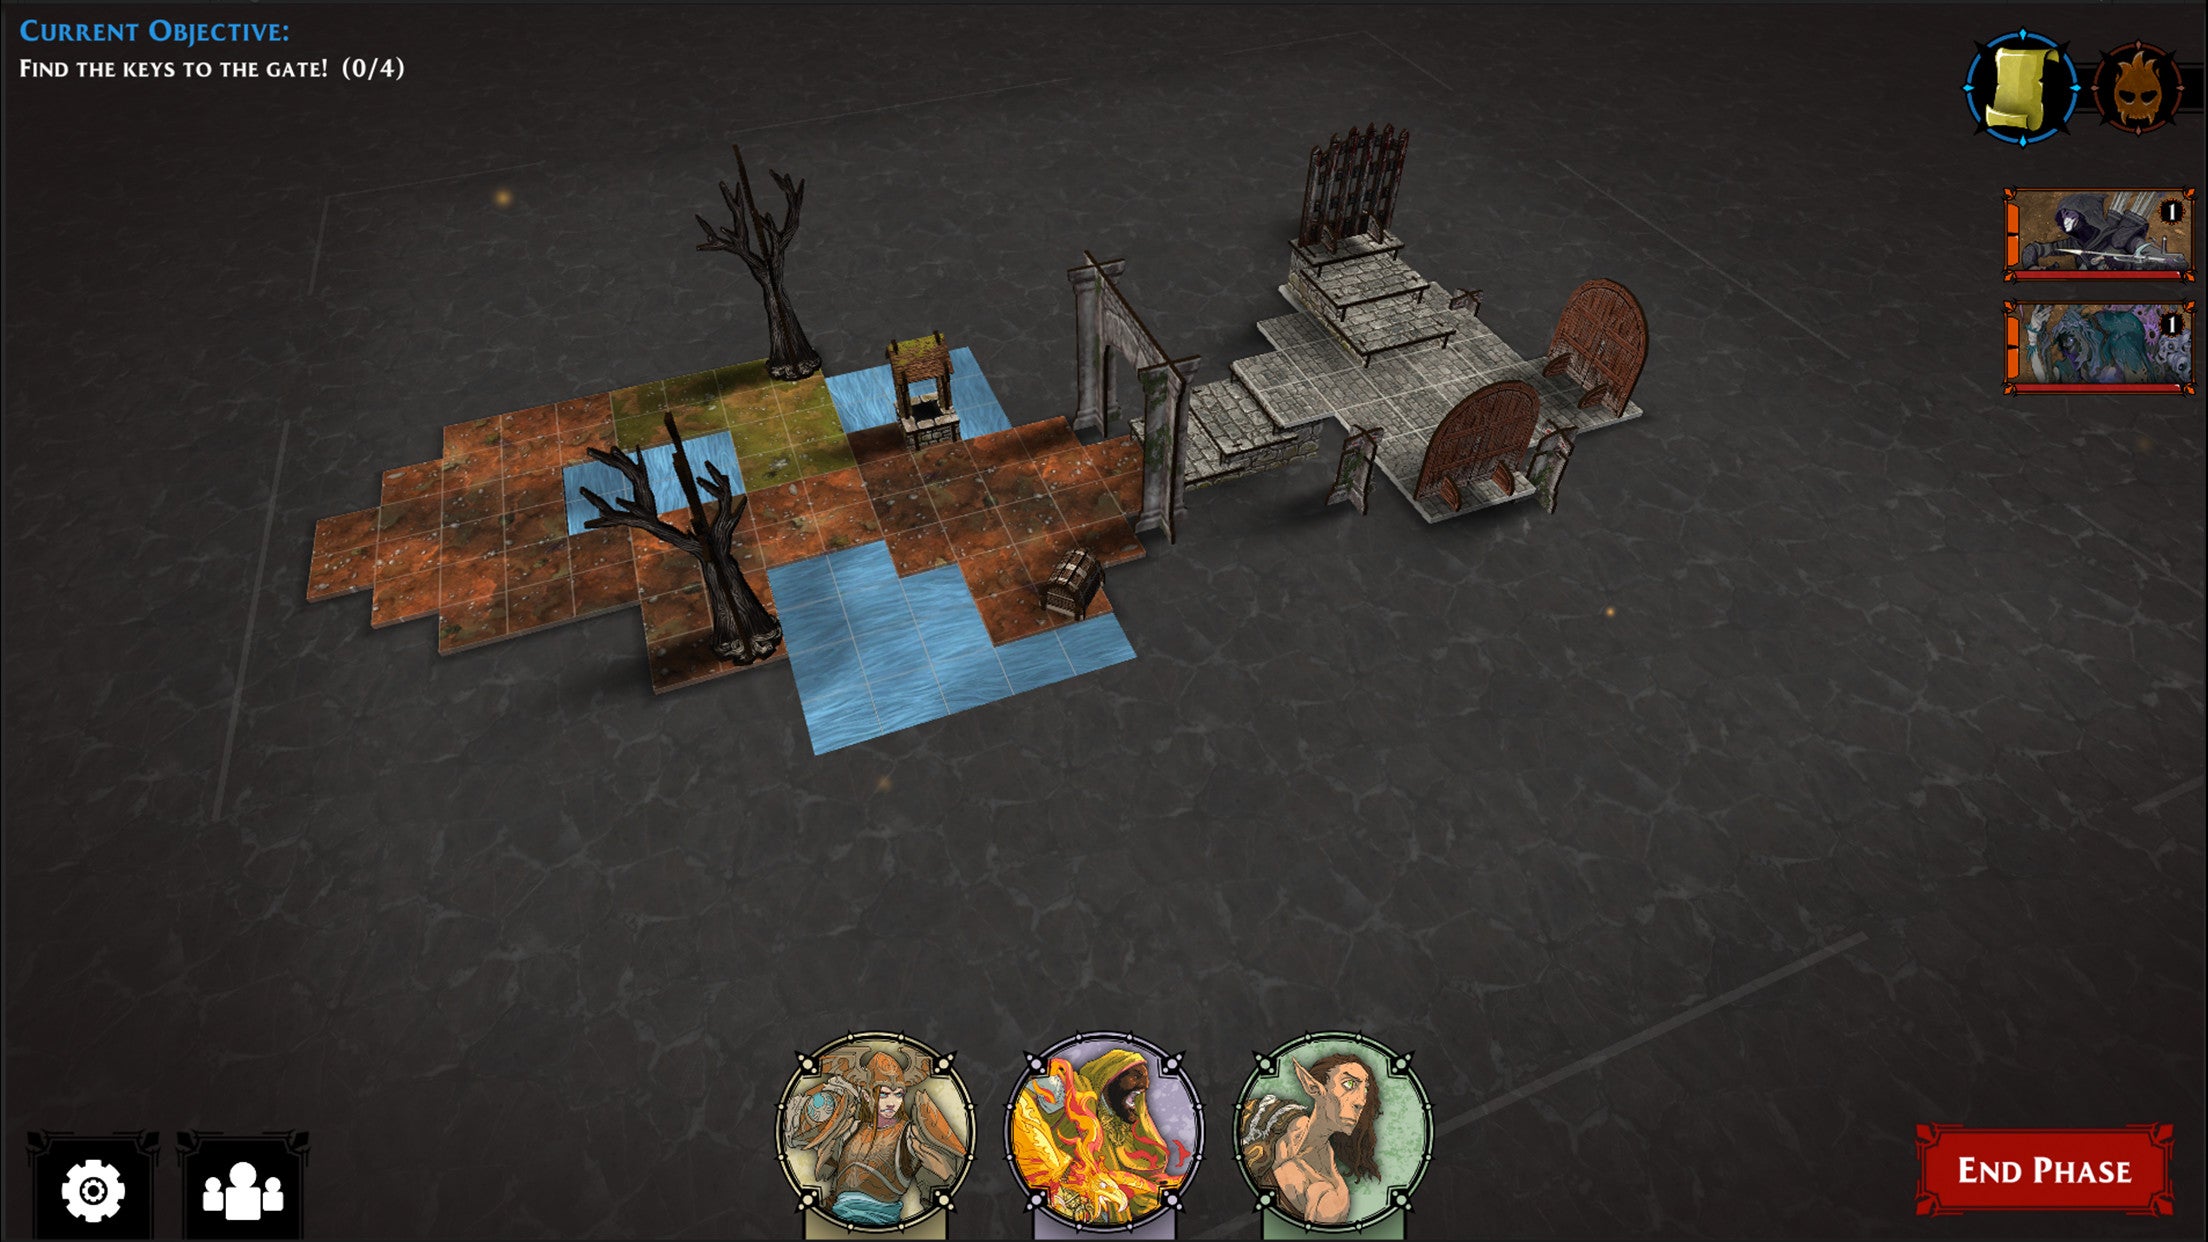 A visualisation of a tabletop game in the Descent: Legends of the Dark Steam companion app